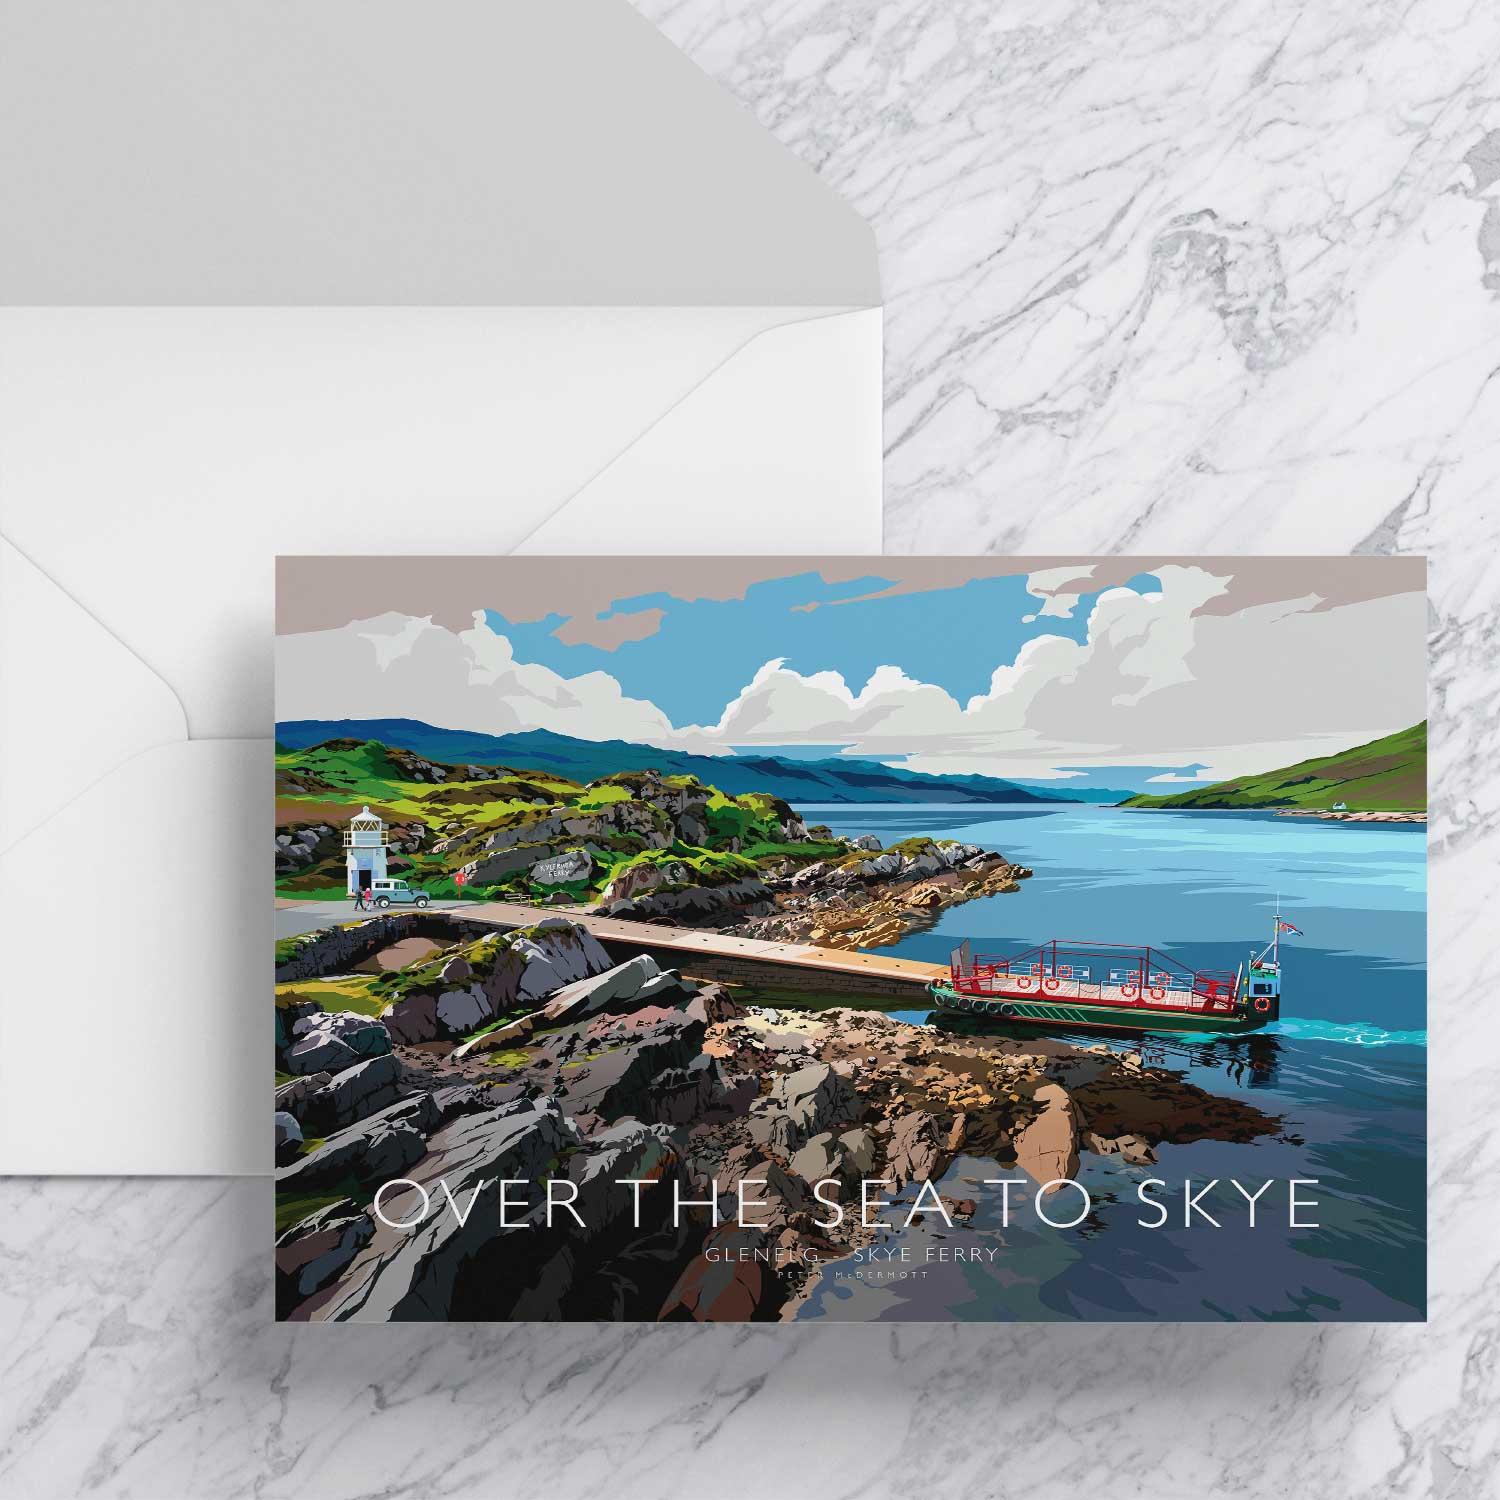 Over the Sea to Skye Greeting Card from an original painting by artist Peter McDermott